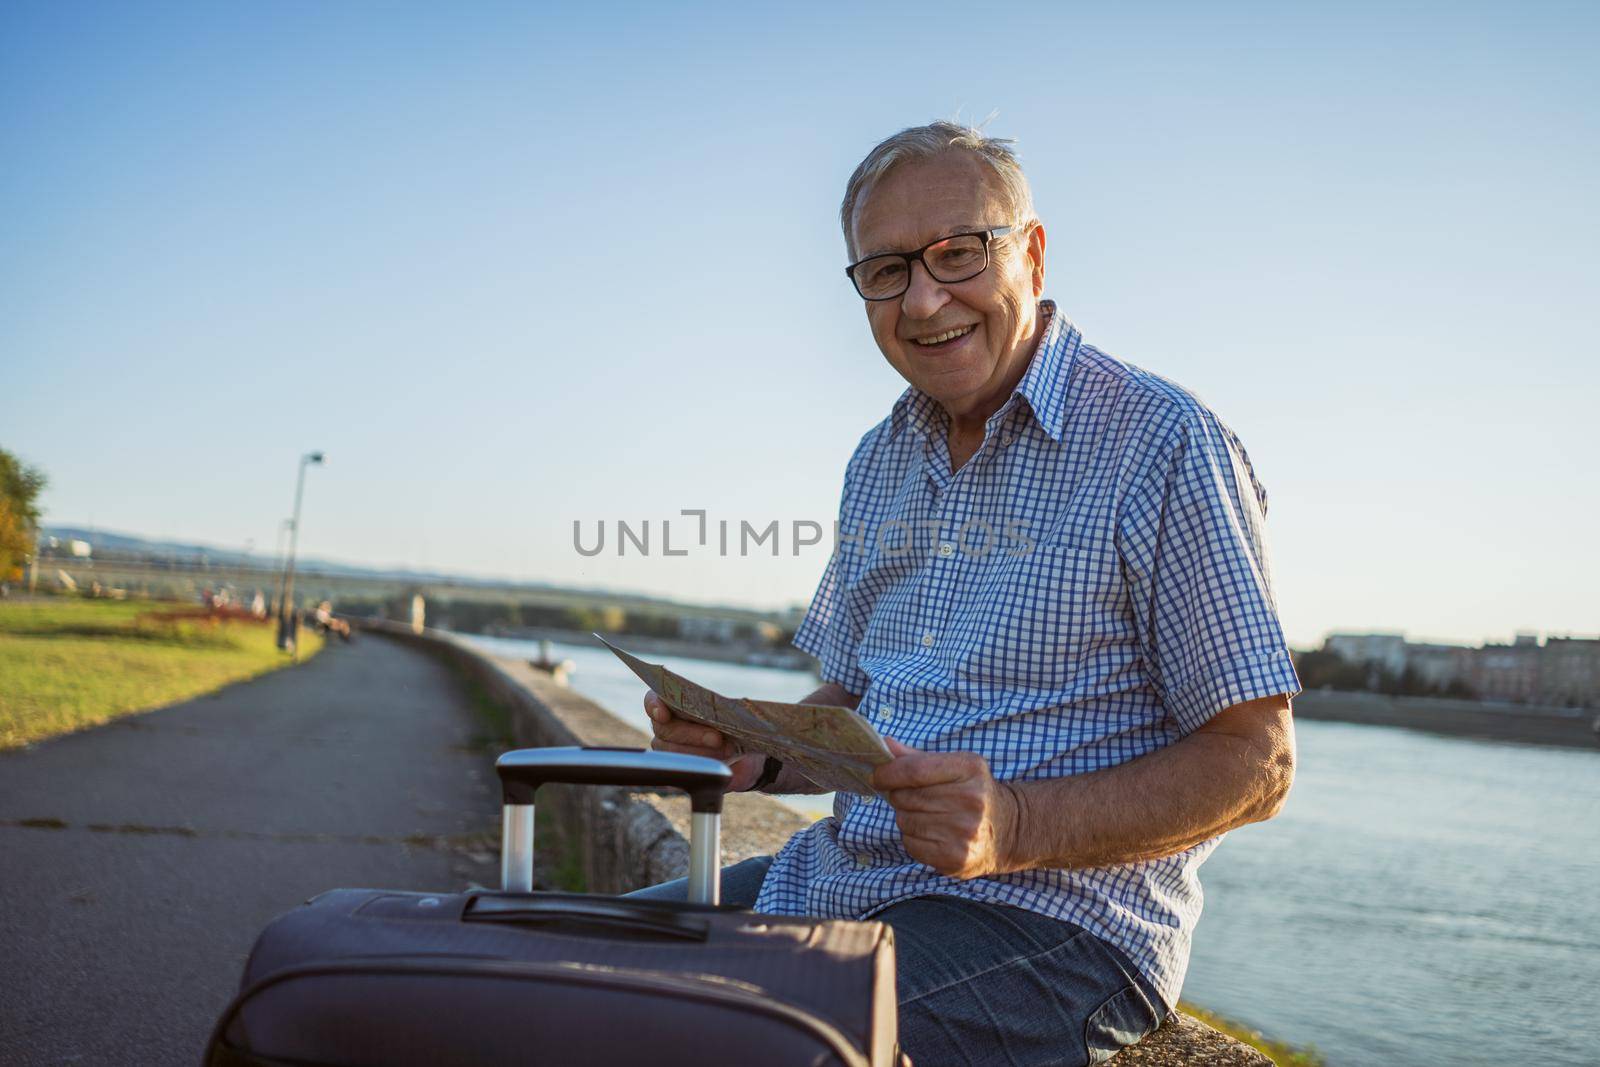 Outdoor portrait of senior man who is on city tour.